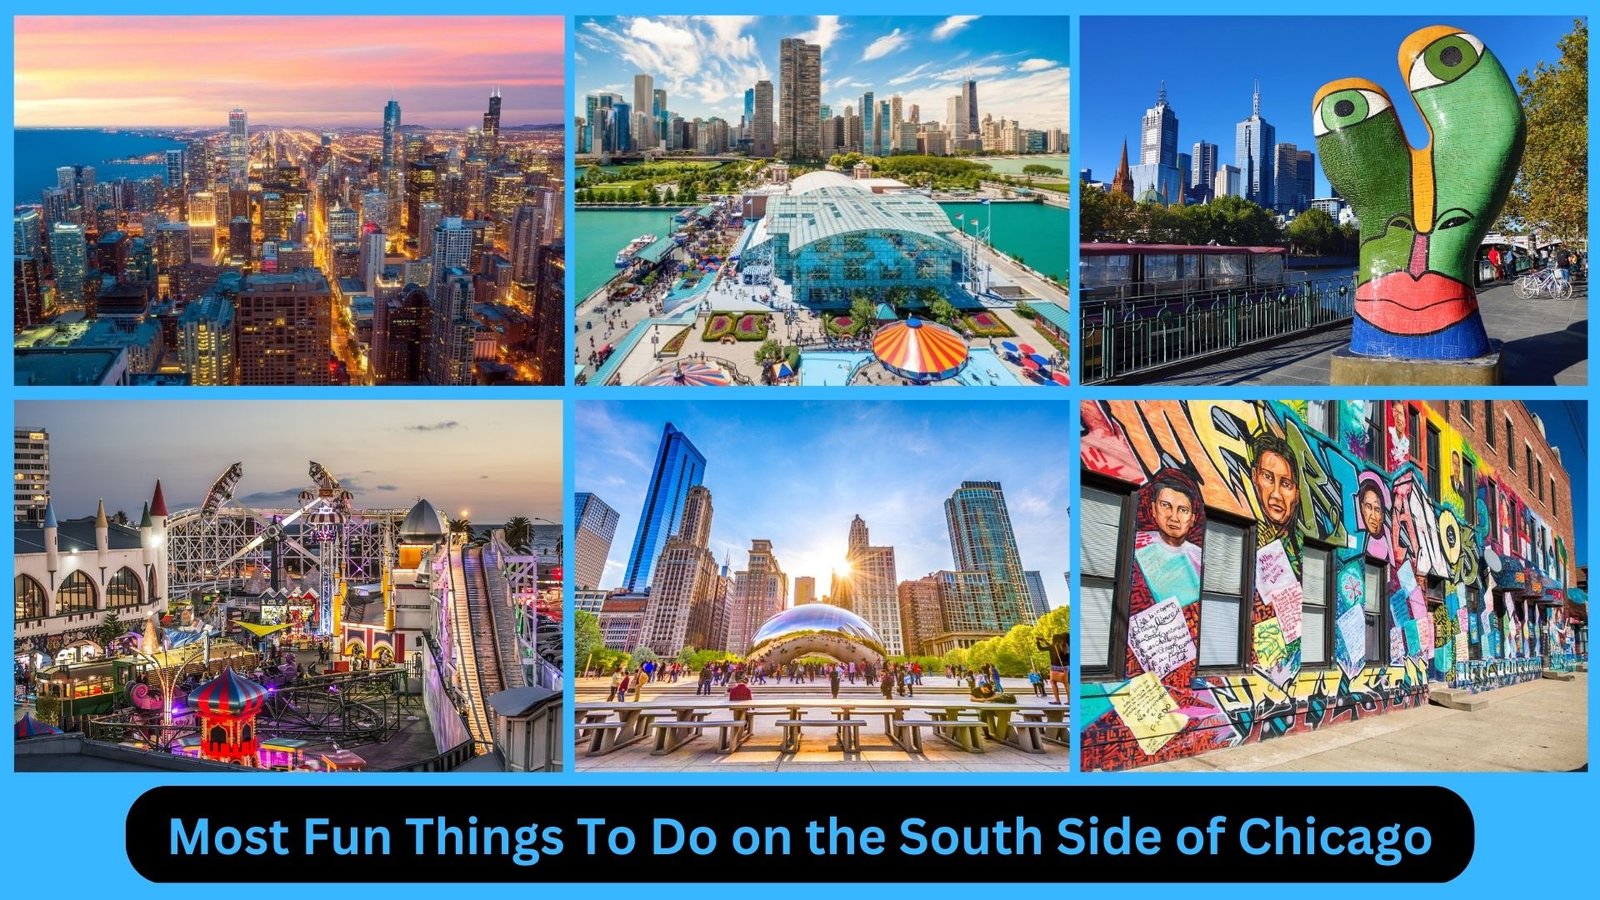 Most Fun Things To Do on the South Side of Chicago